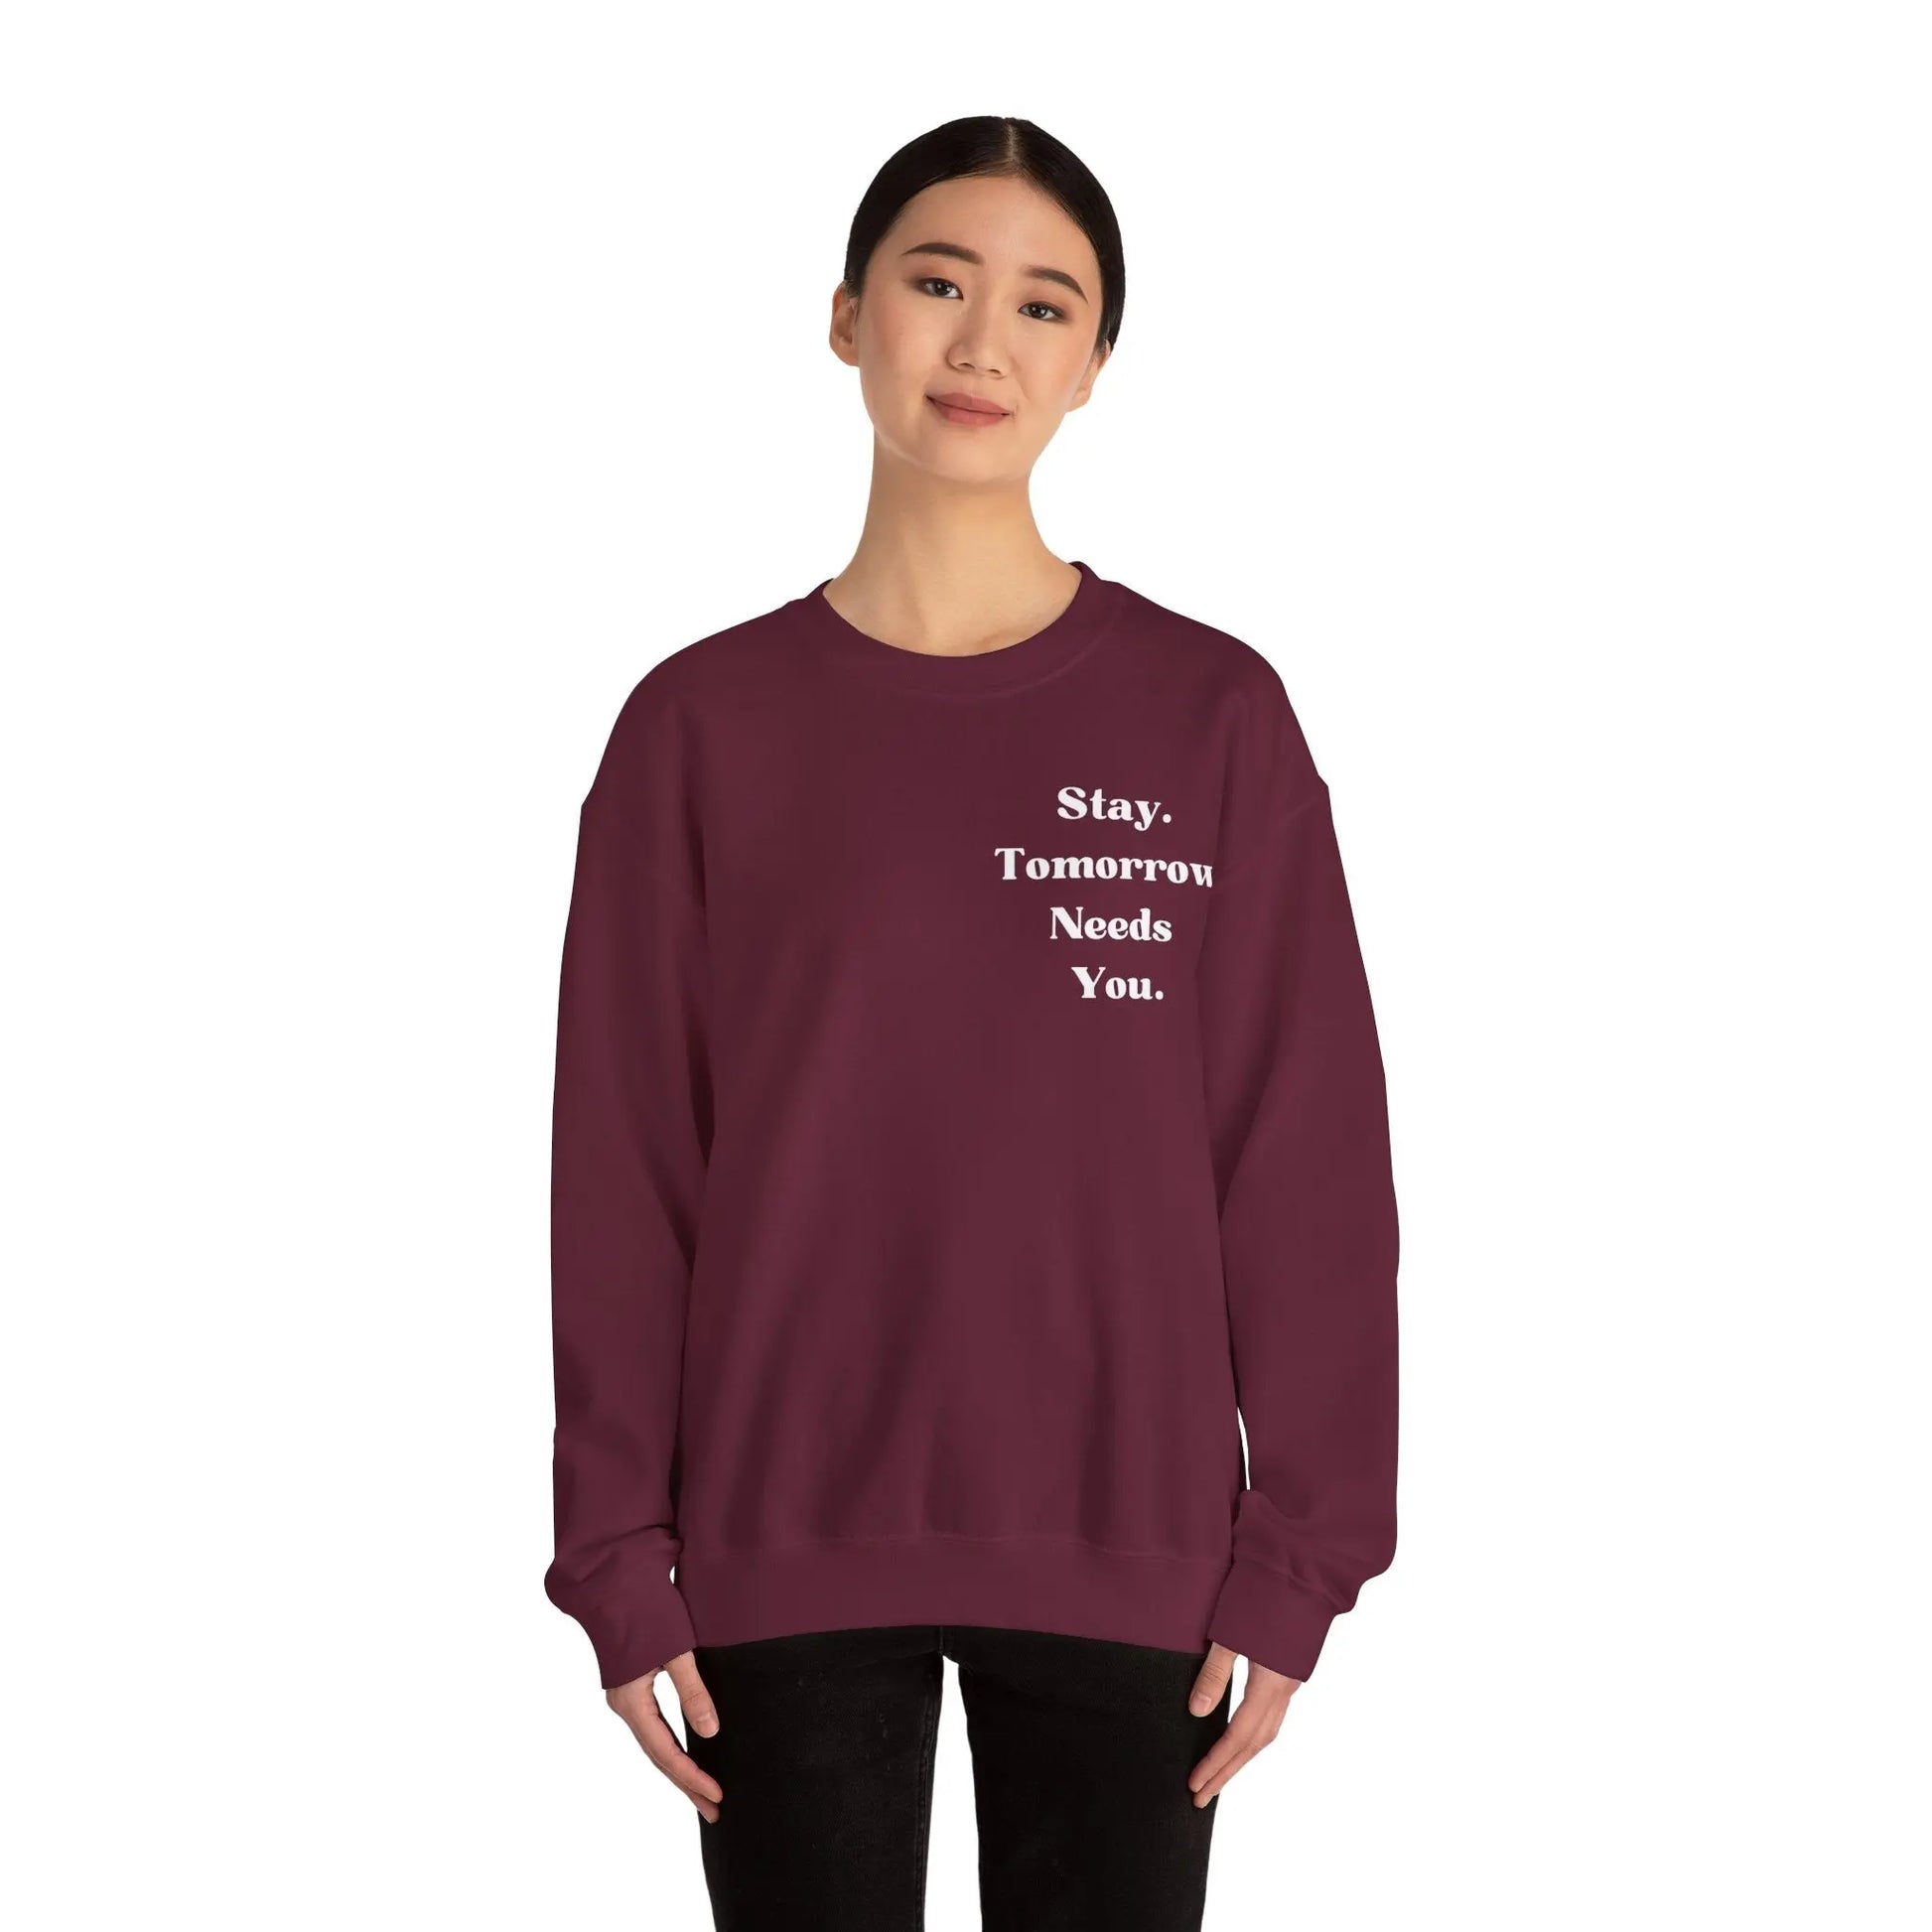 Suicide Awareness To The Person Behind Me: Stay Tomorrow Needs You Sweatshirt Printify